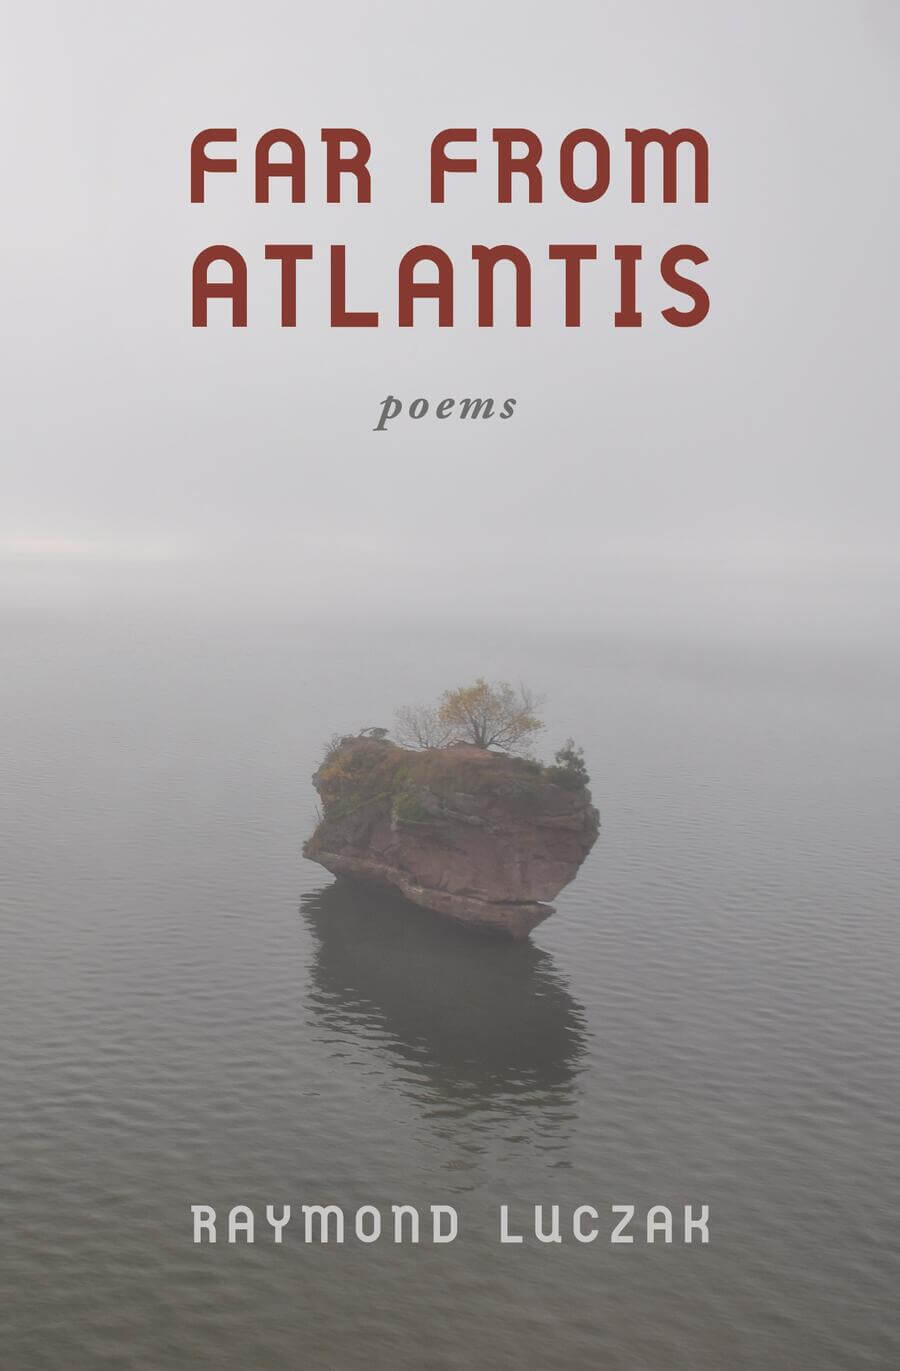 Against a gray and overcast seascape in which there seems no discernible horizon, a dull rust-colored rock formation island with a squat tree bejeweled with orange leaves on top appears like a ship on a tranquil sea, its gentle waves the color of brown coal. Above the island is the title FAR FROM ATLANTIS. Below the book’s title is the subtitle “poems.” Far below on the cover is the author’s name RAYMOND LUCZAK.